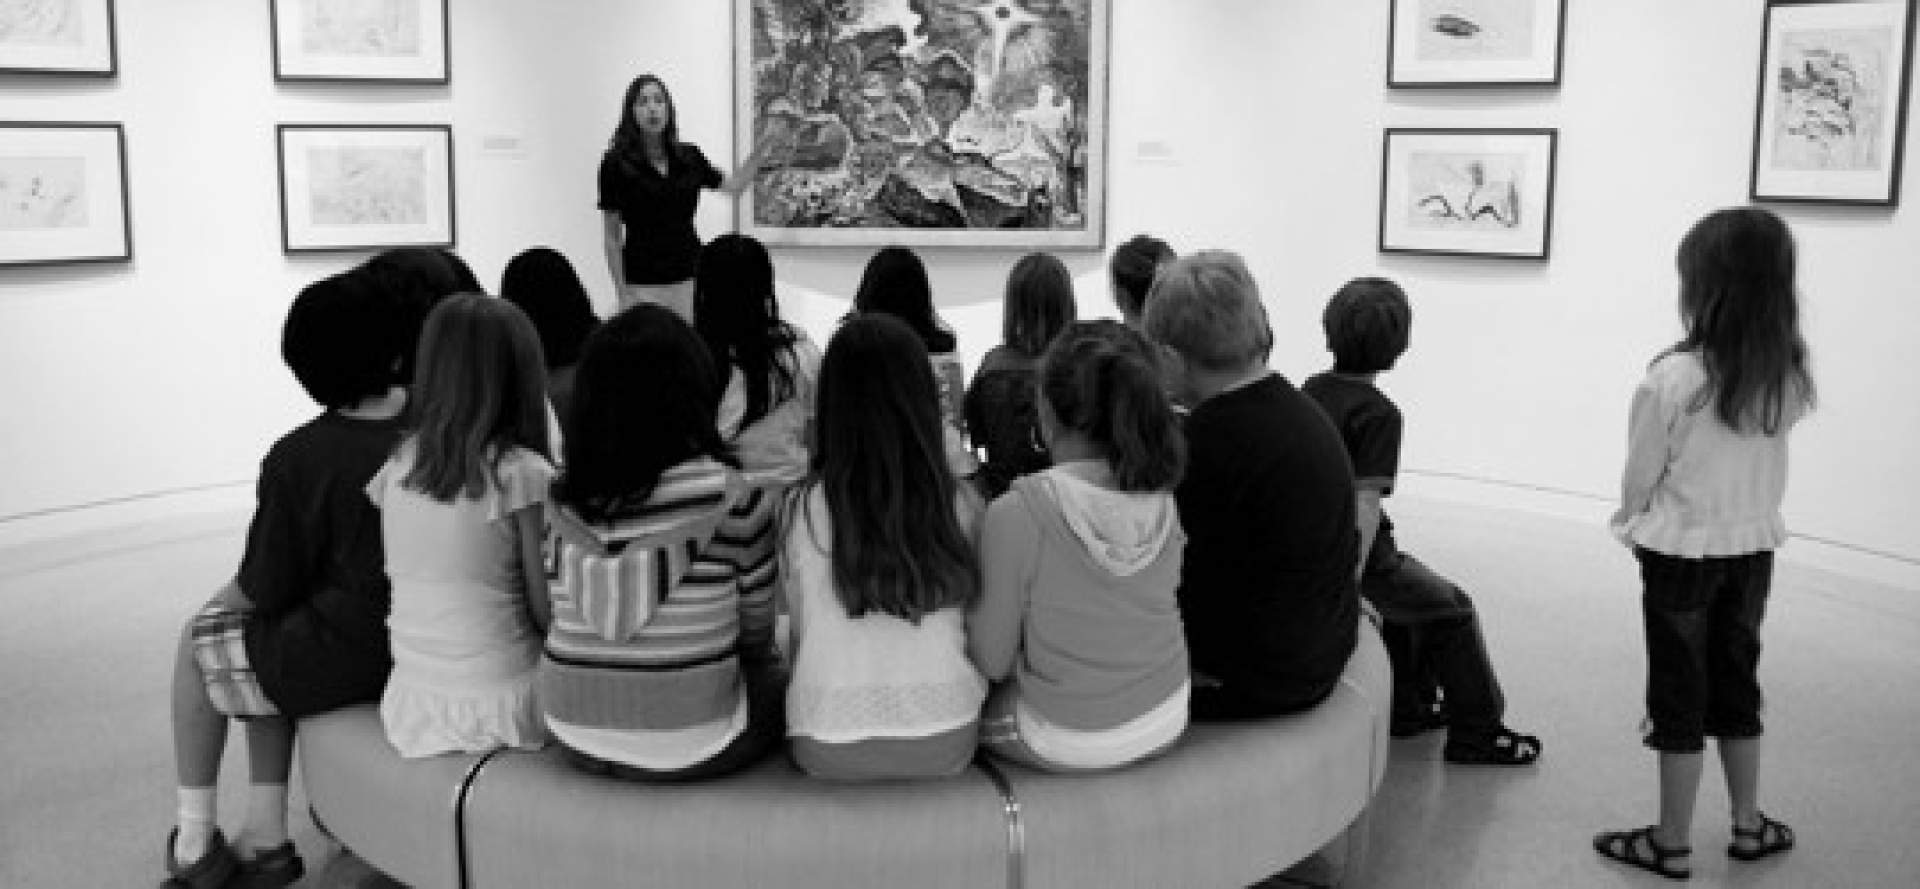 Call for Docents: Applications due by October 1, 2016